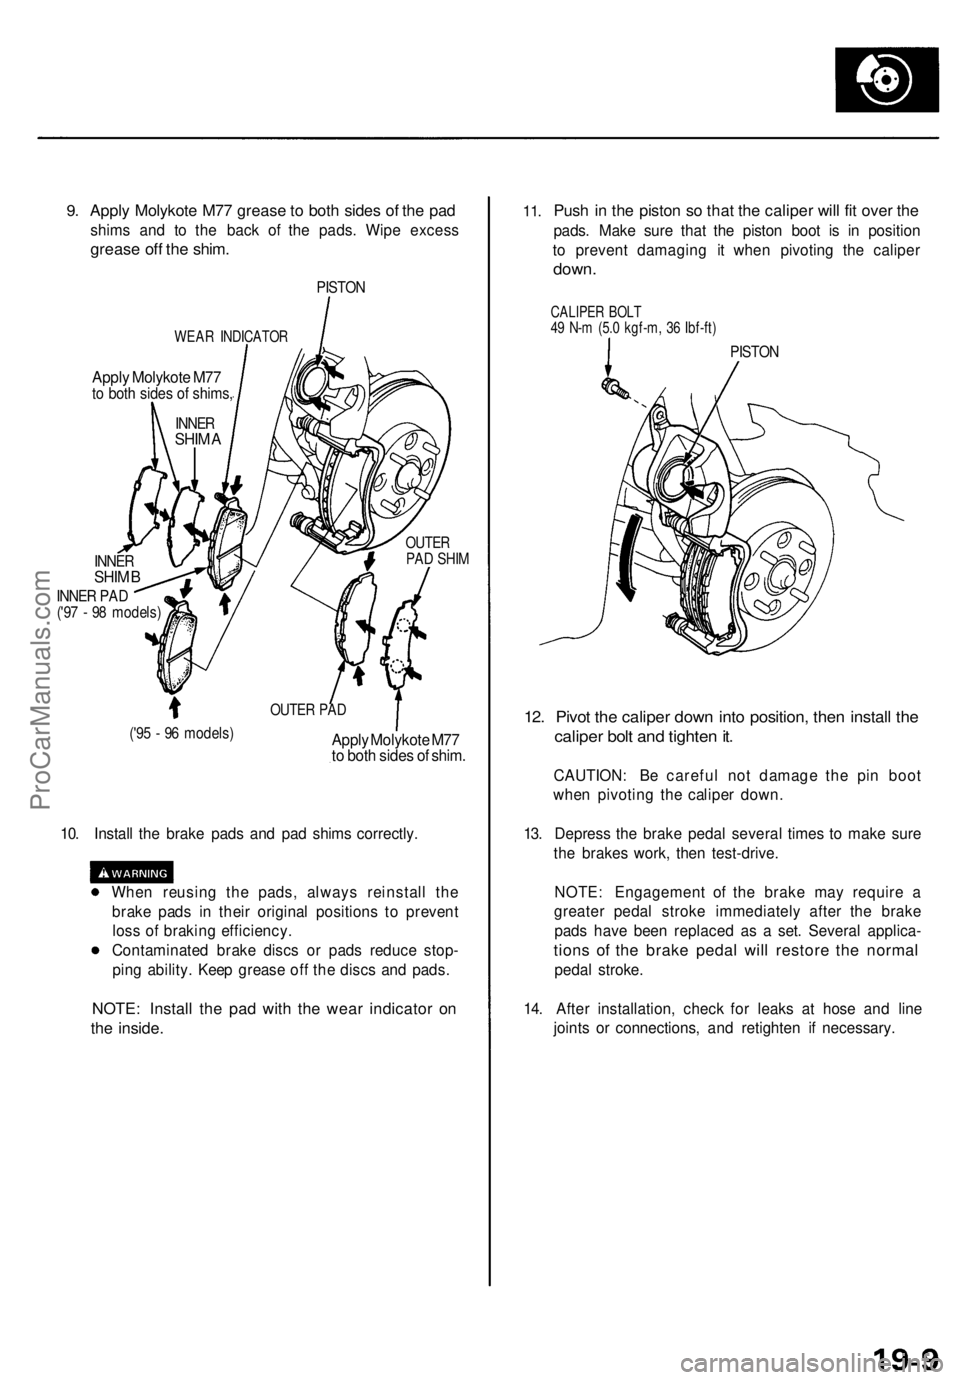 ACURA TL 1995  Service Repair Manual 
9. 
Apply Molykote M77 grease to both sides of the pad

shims and to the back of the pads. Wipe excess

grease off the shim.

PISTON

WEAR INDICATOR

Apply Molykote M77

to both sides of shims,

INNE